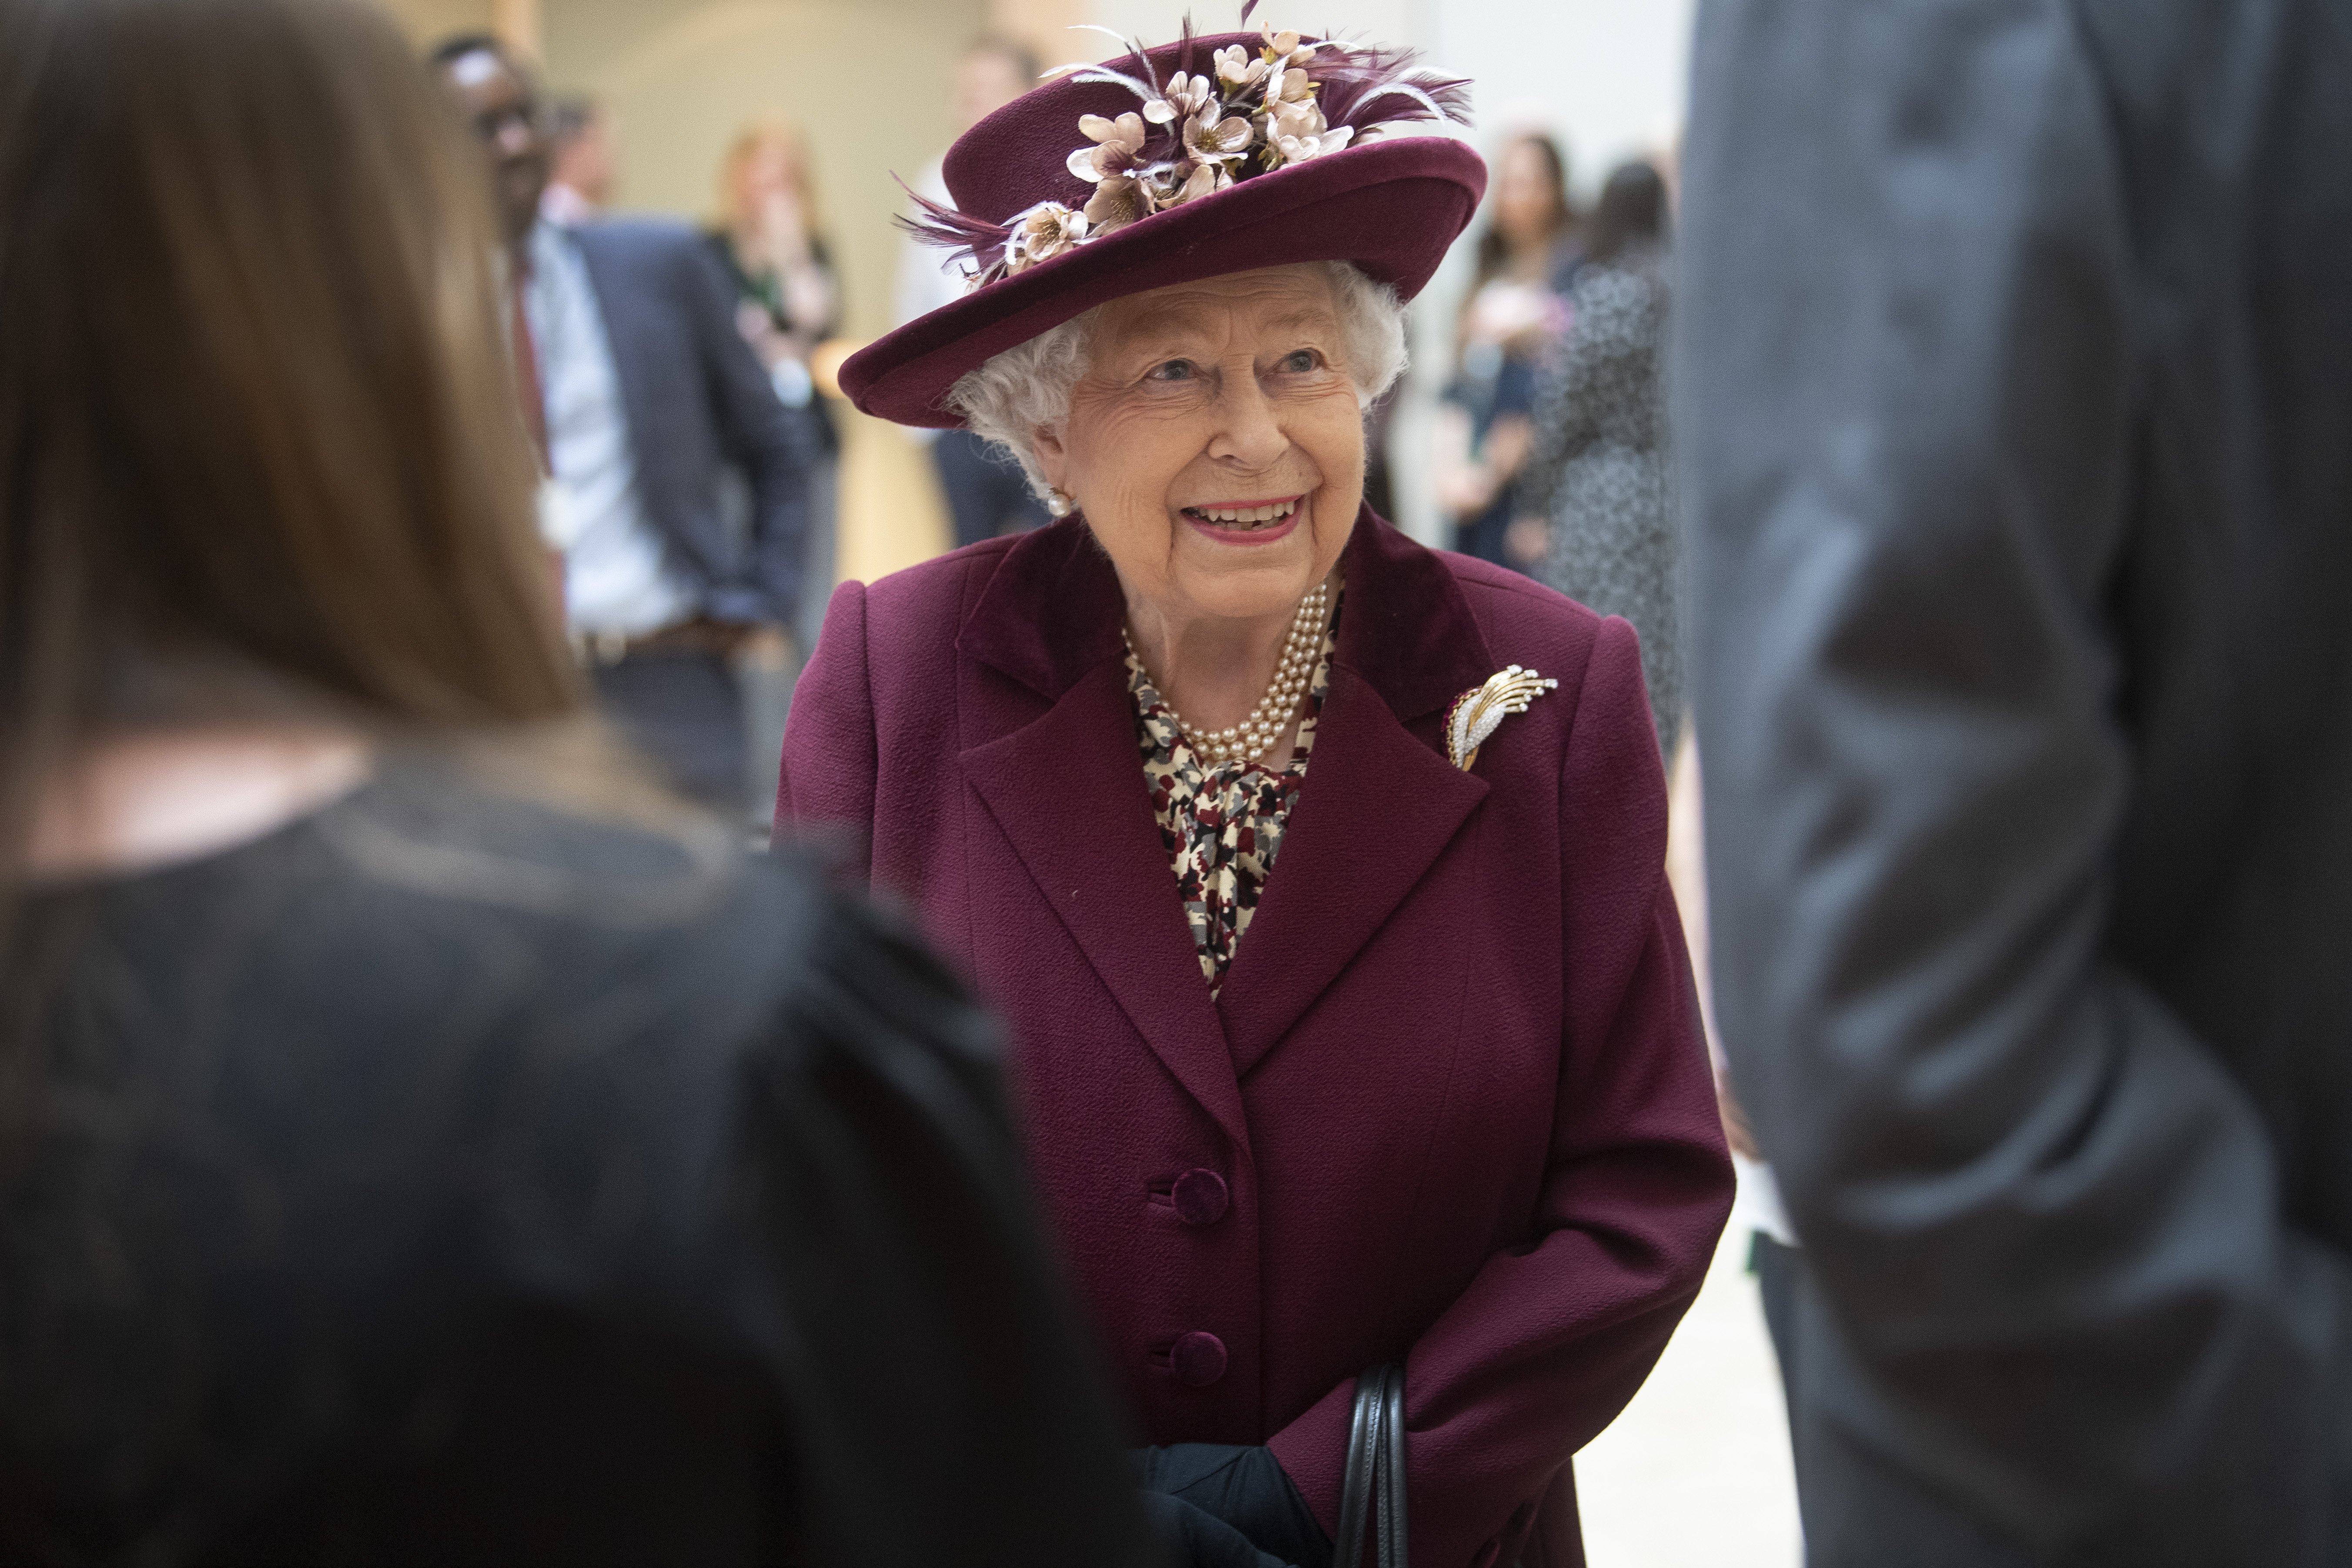 Queen Elizabeth II talks with MI5 officers during a visit to the headquarters of MI5 at Thames House on February 25, 2020, in London, England. | Source: Getty Images.